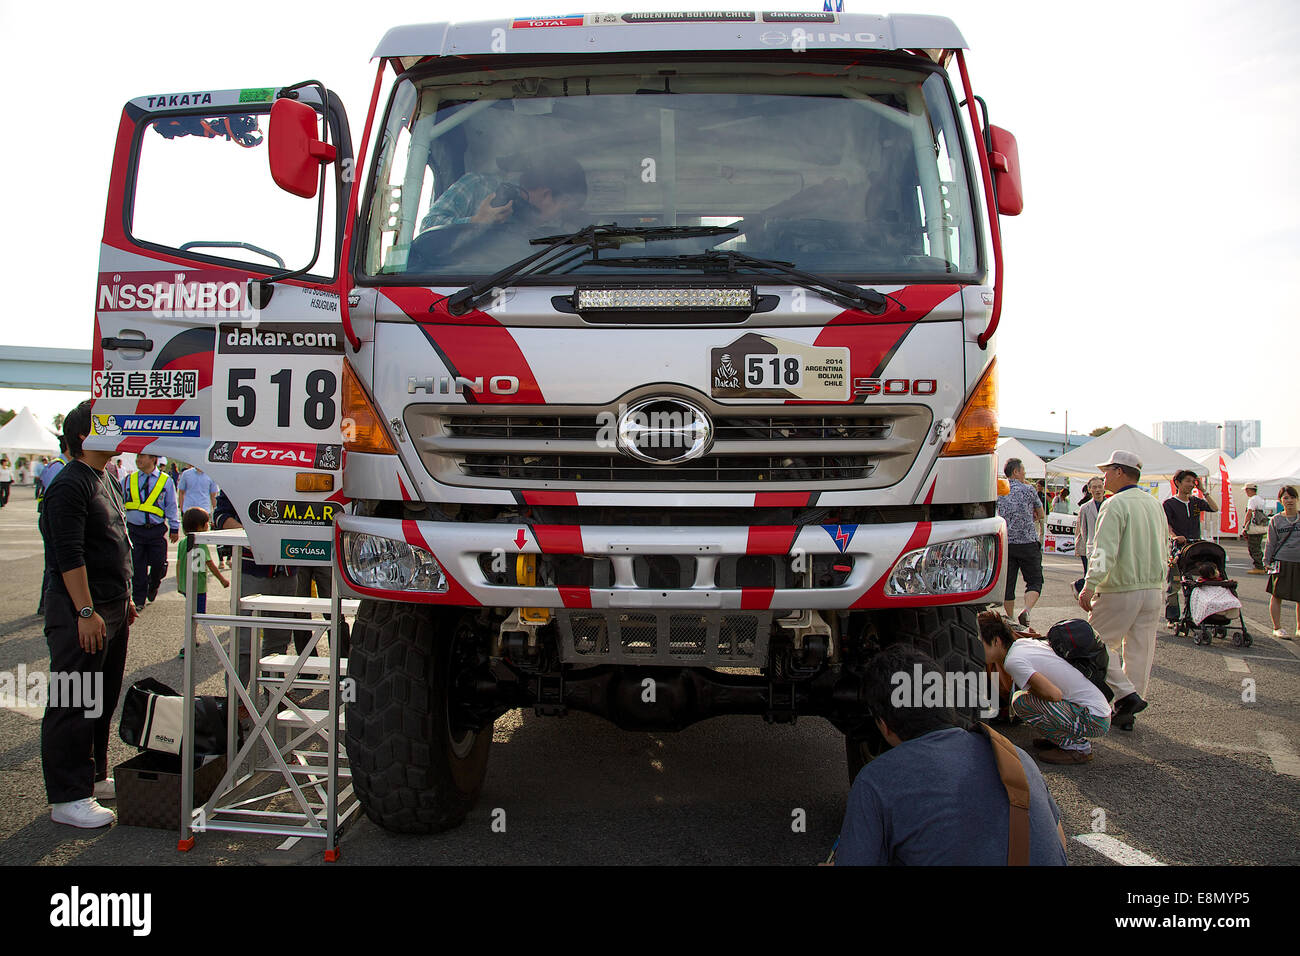 Odaiba, Tokyo, Japan. 11th Oct, 2014. Visitors see the truck 'Hino 500' during the Tokyo Motor Fes 2014. The Tokyo Motor Fes 2014 runs from October 11th to 13th with the aim of giving visitors of all ages a chance to interact with current and futuristic motorized vehicles. Held outside on reclaimed land in Tokyo Bay the event has enough space for visitors to test new vehicles and for a synchronized driving demonstration by the Cirque de Mobi. This year Mercedes-Benz and BMW will also participate along with 13 Japanese makers. Credit:  Aflo Co. Ltd./Alamy Live News Stock Photo